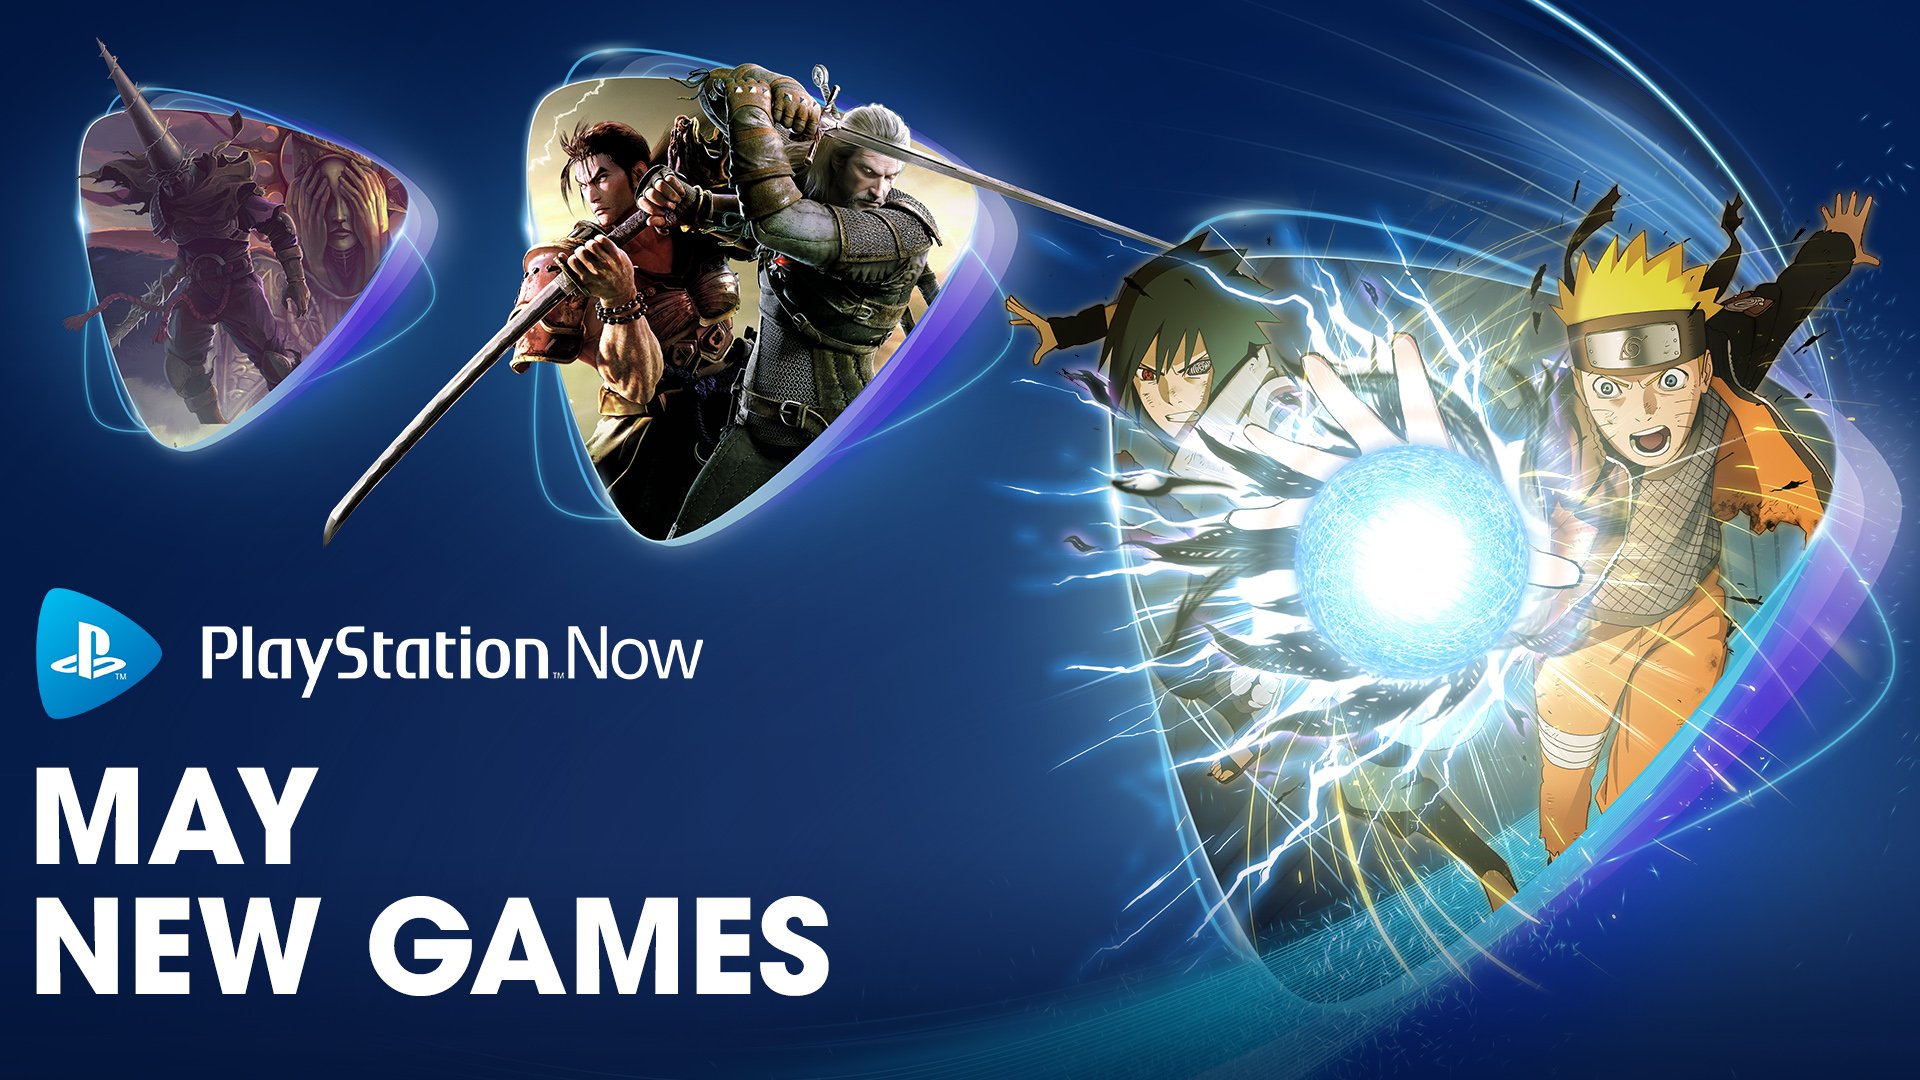 #
      PlayStation Now adds Naruto Shippuden: Ultimate Ninja Storm 4, Soulcalibur VI, and Blasphemous in May